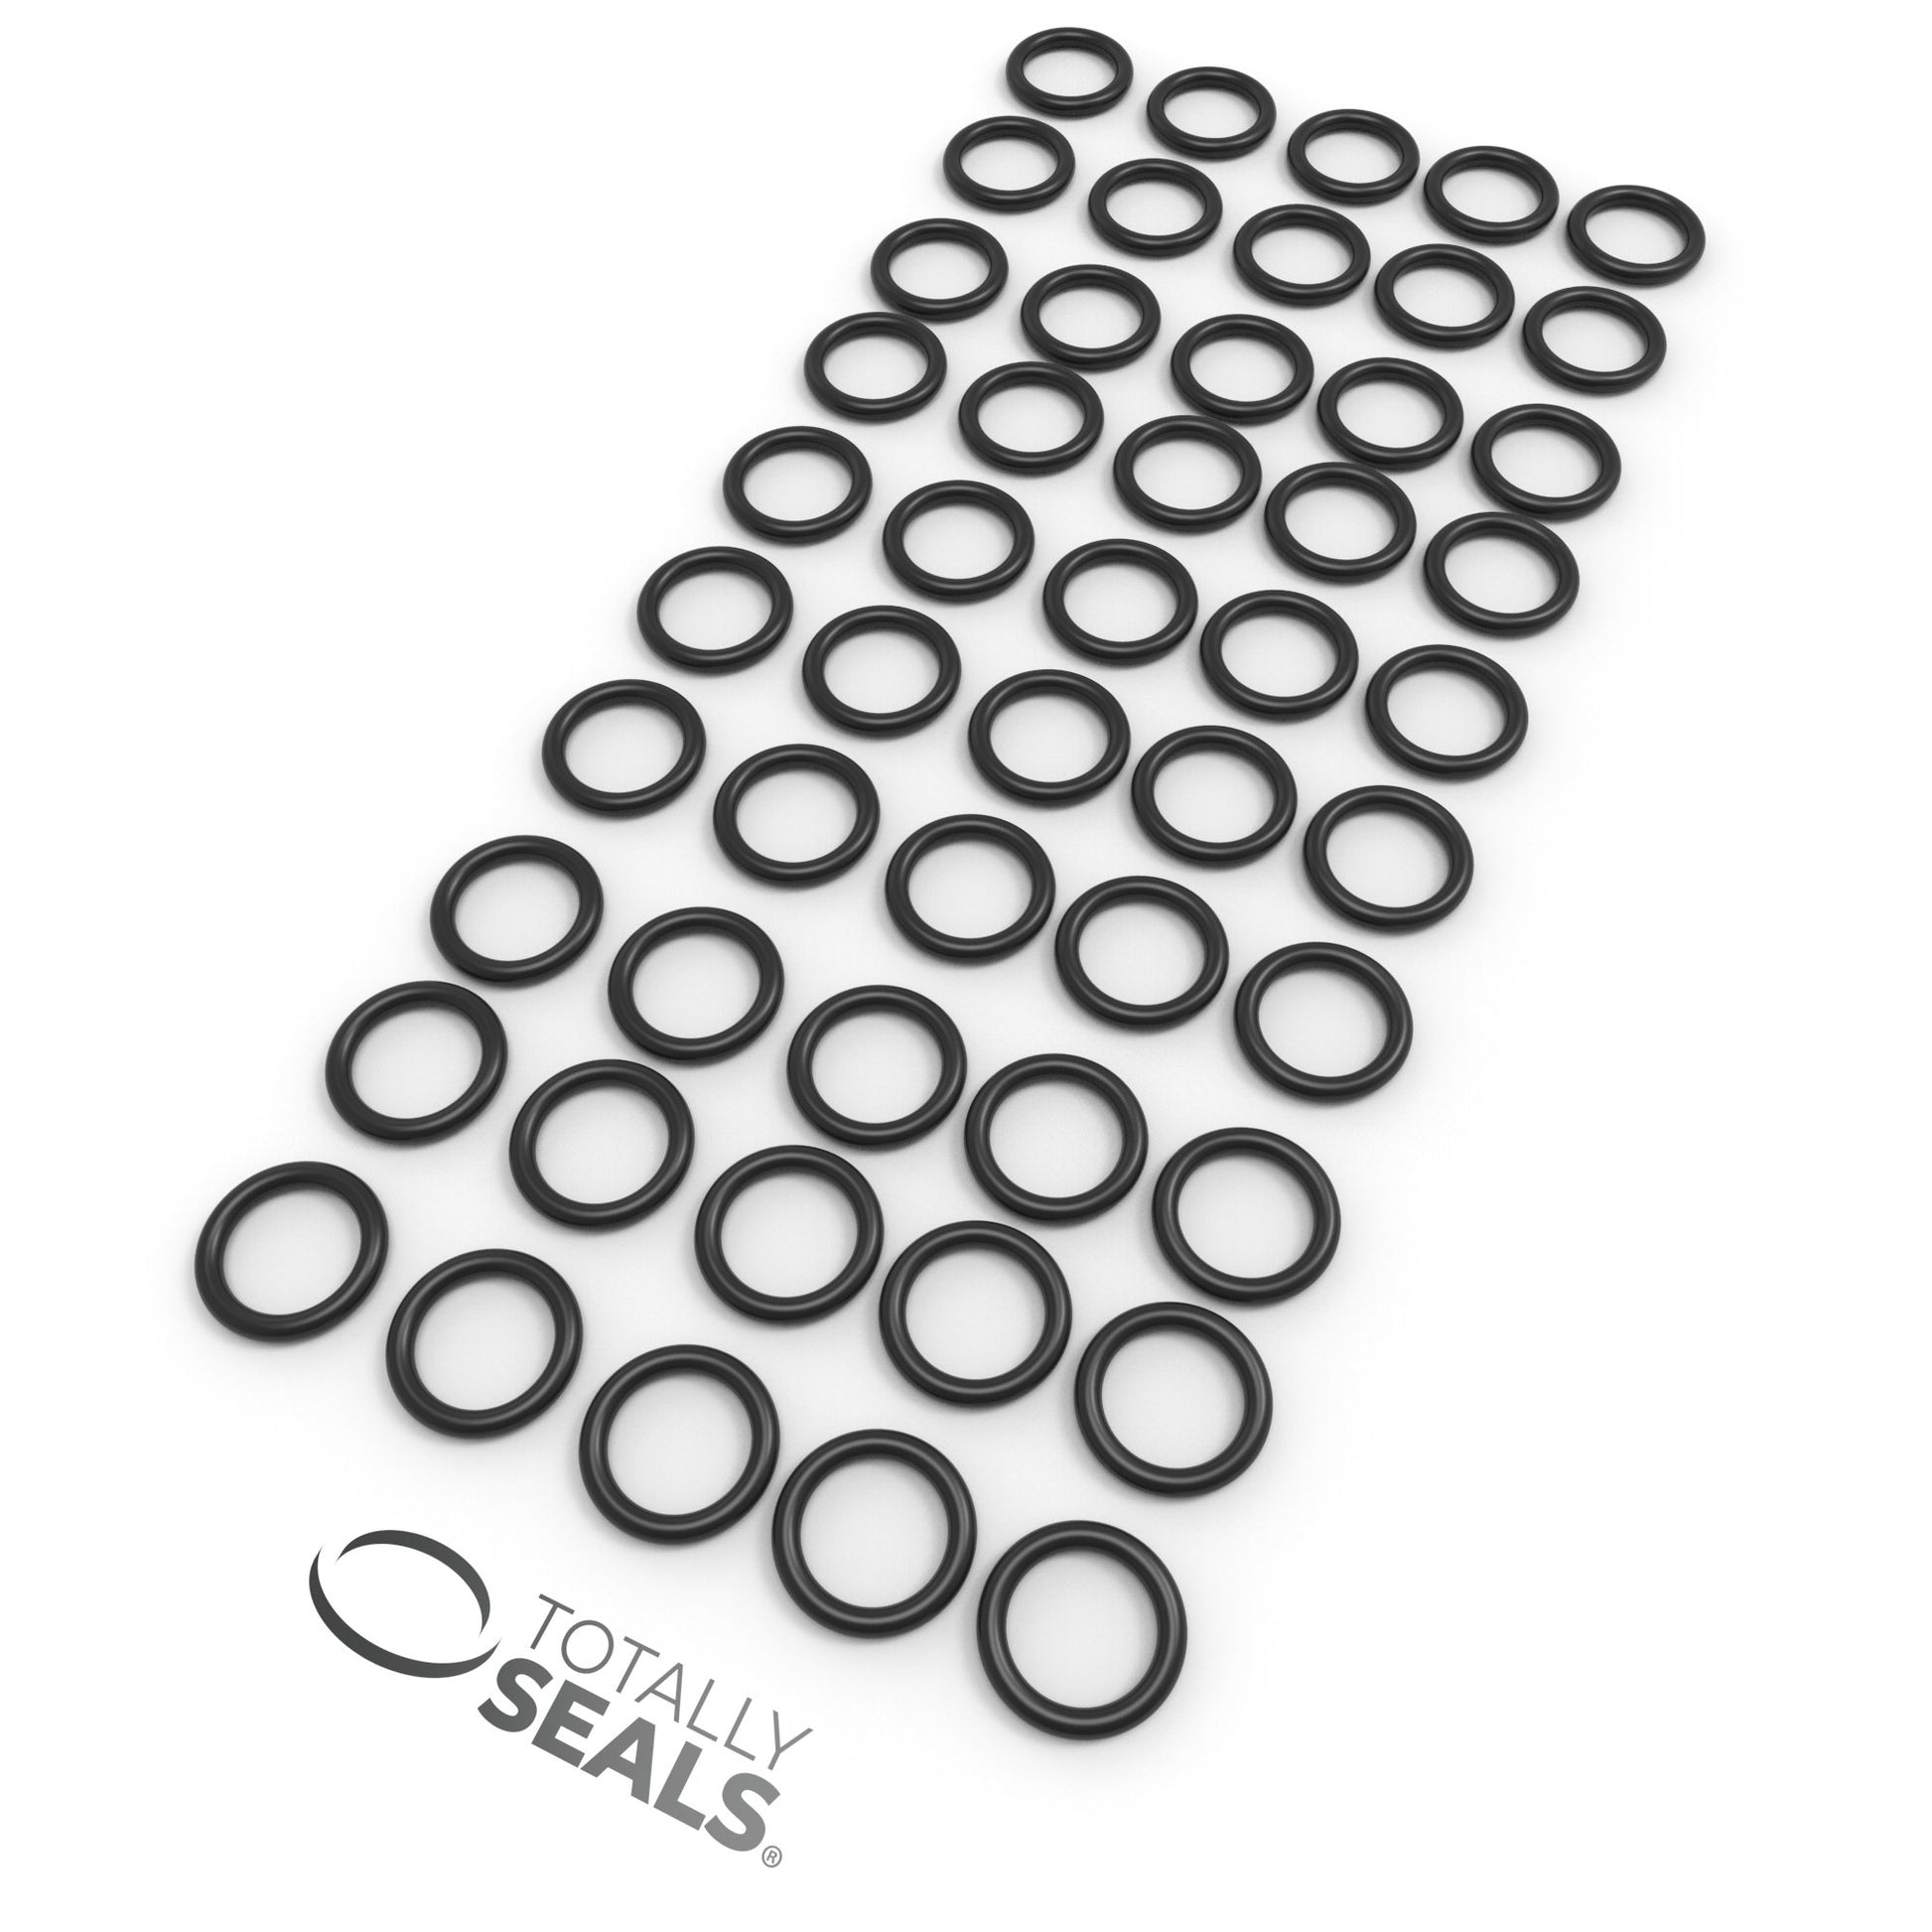 1 3/16" x 1/8" (BS217) Imperial Nitrile Rubber O-Rings - Totally Seals®